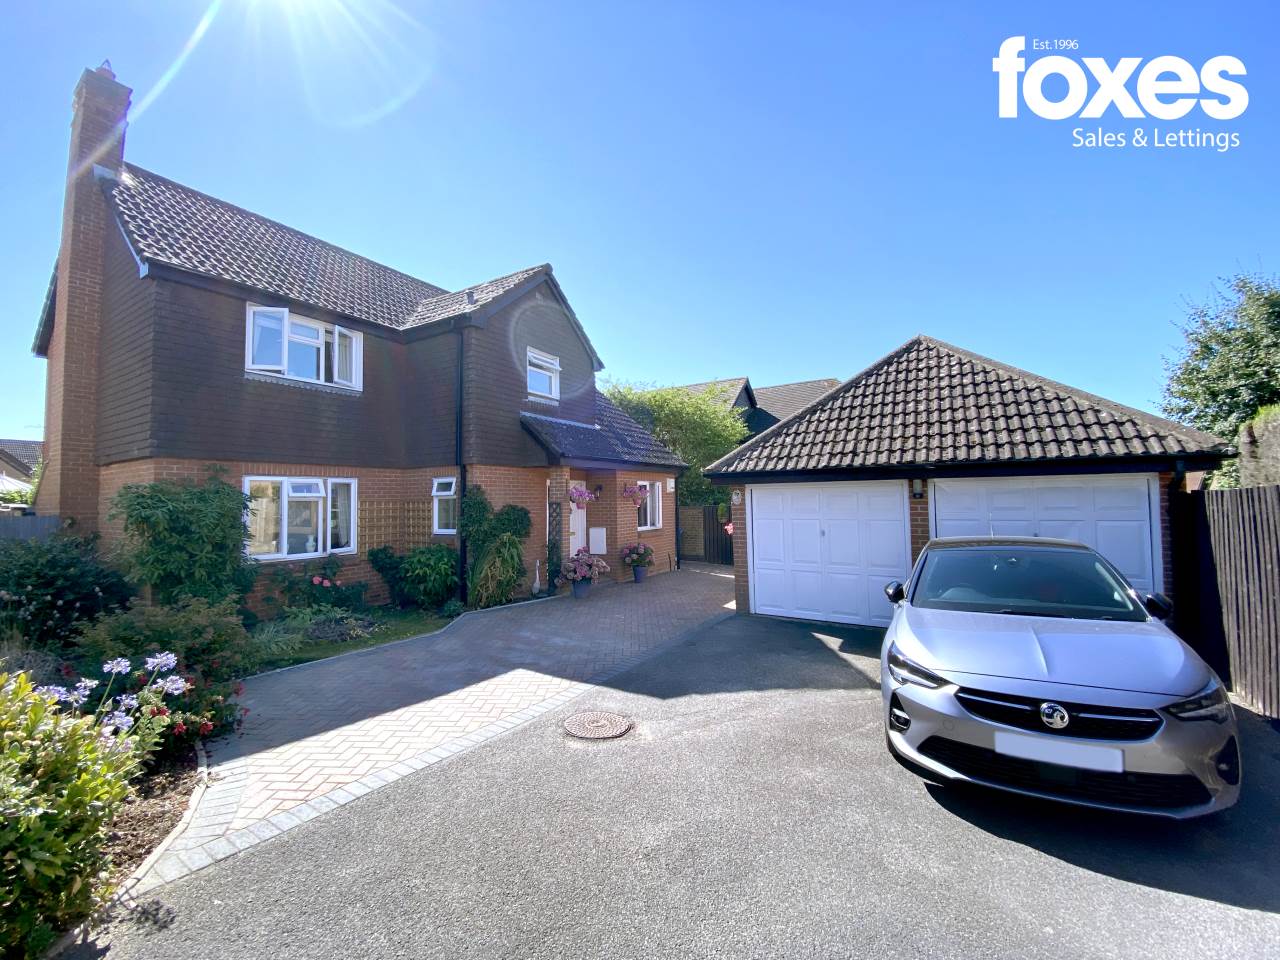 DETACHED HOUSE | FOUR BEDROOMS | EN SUITE | LOUNGE, STUDY, DINING ROOM | MODERN KITCHEN & UTILITY | DOUBLE GARAGE & PARKING | BEAUTIFUL LANDSCAPED GARDENS | CLOSE TO BOURNEMOUTH UNIVERISTY & EXCELLENT LOCAL SCHOOLS